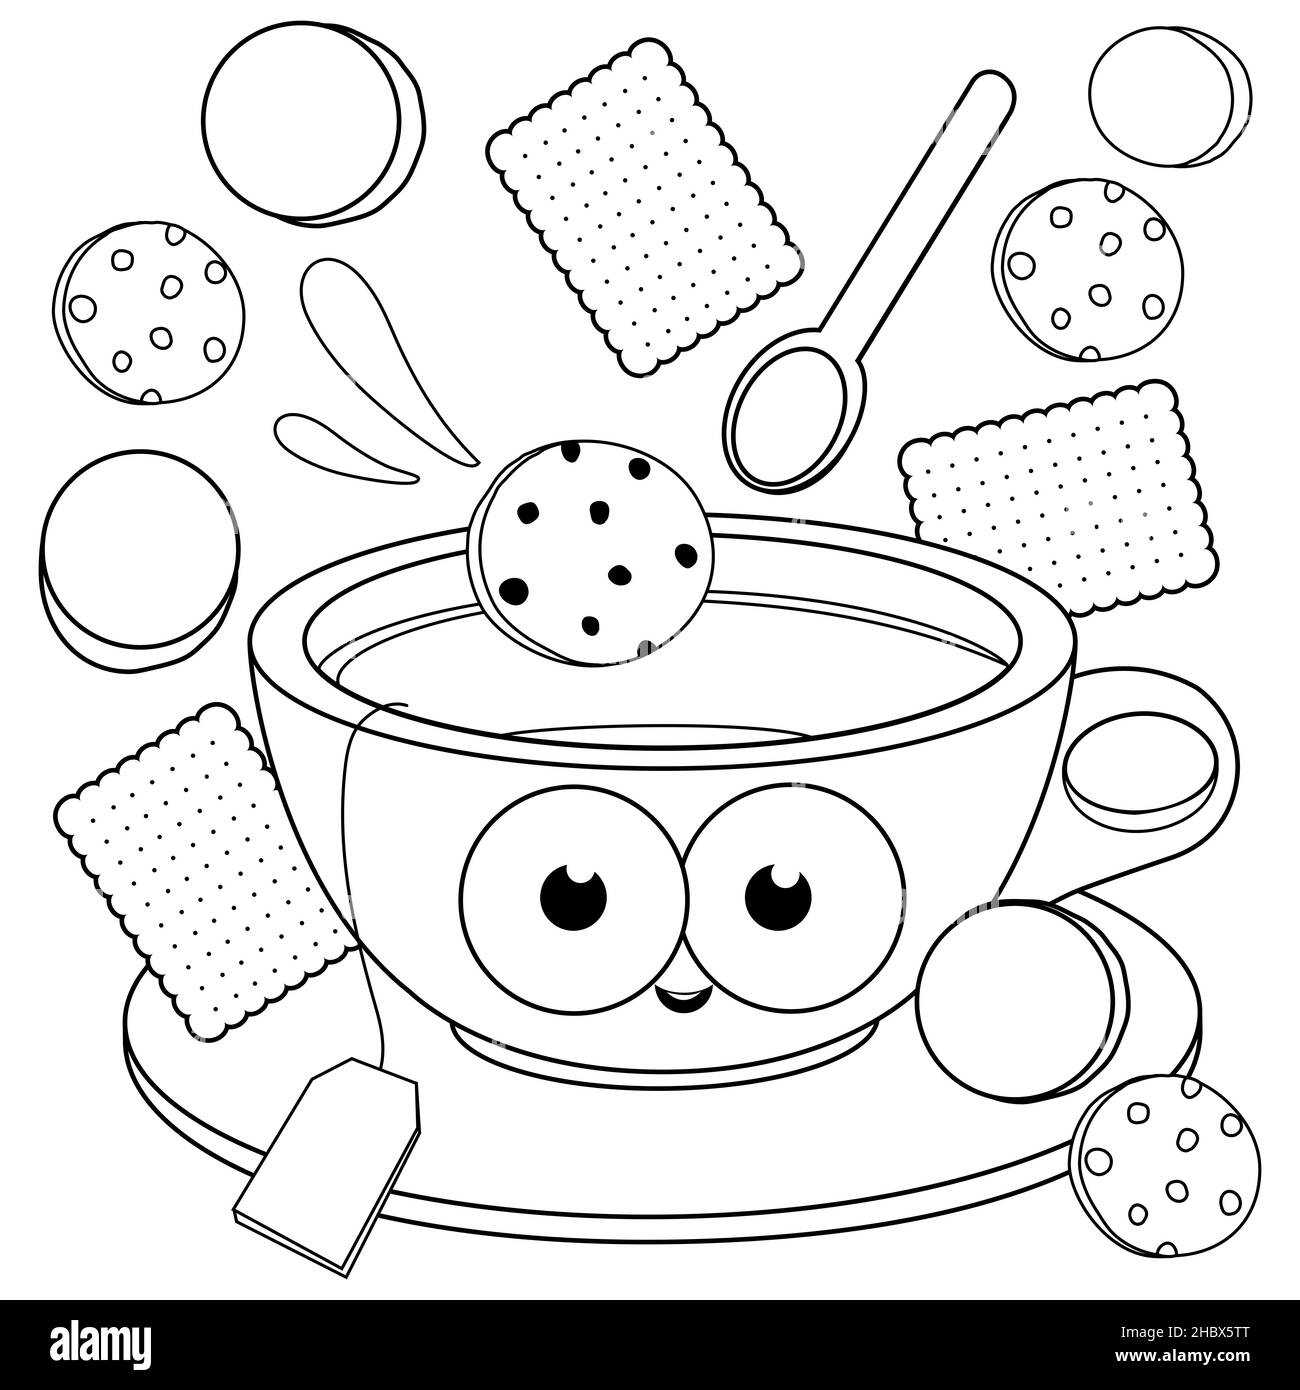 A hot cup of tea, a spoon, biscuits and cookies. Black and white coloring page. Stock Photo